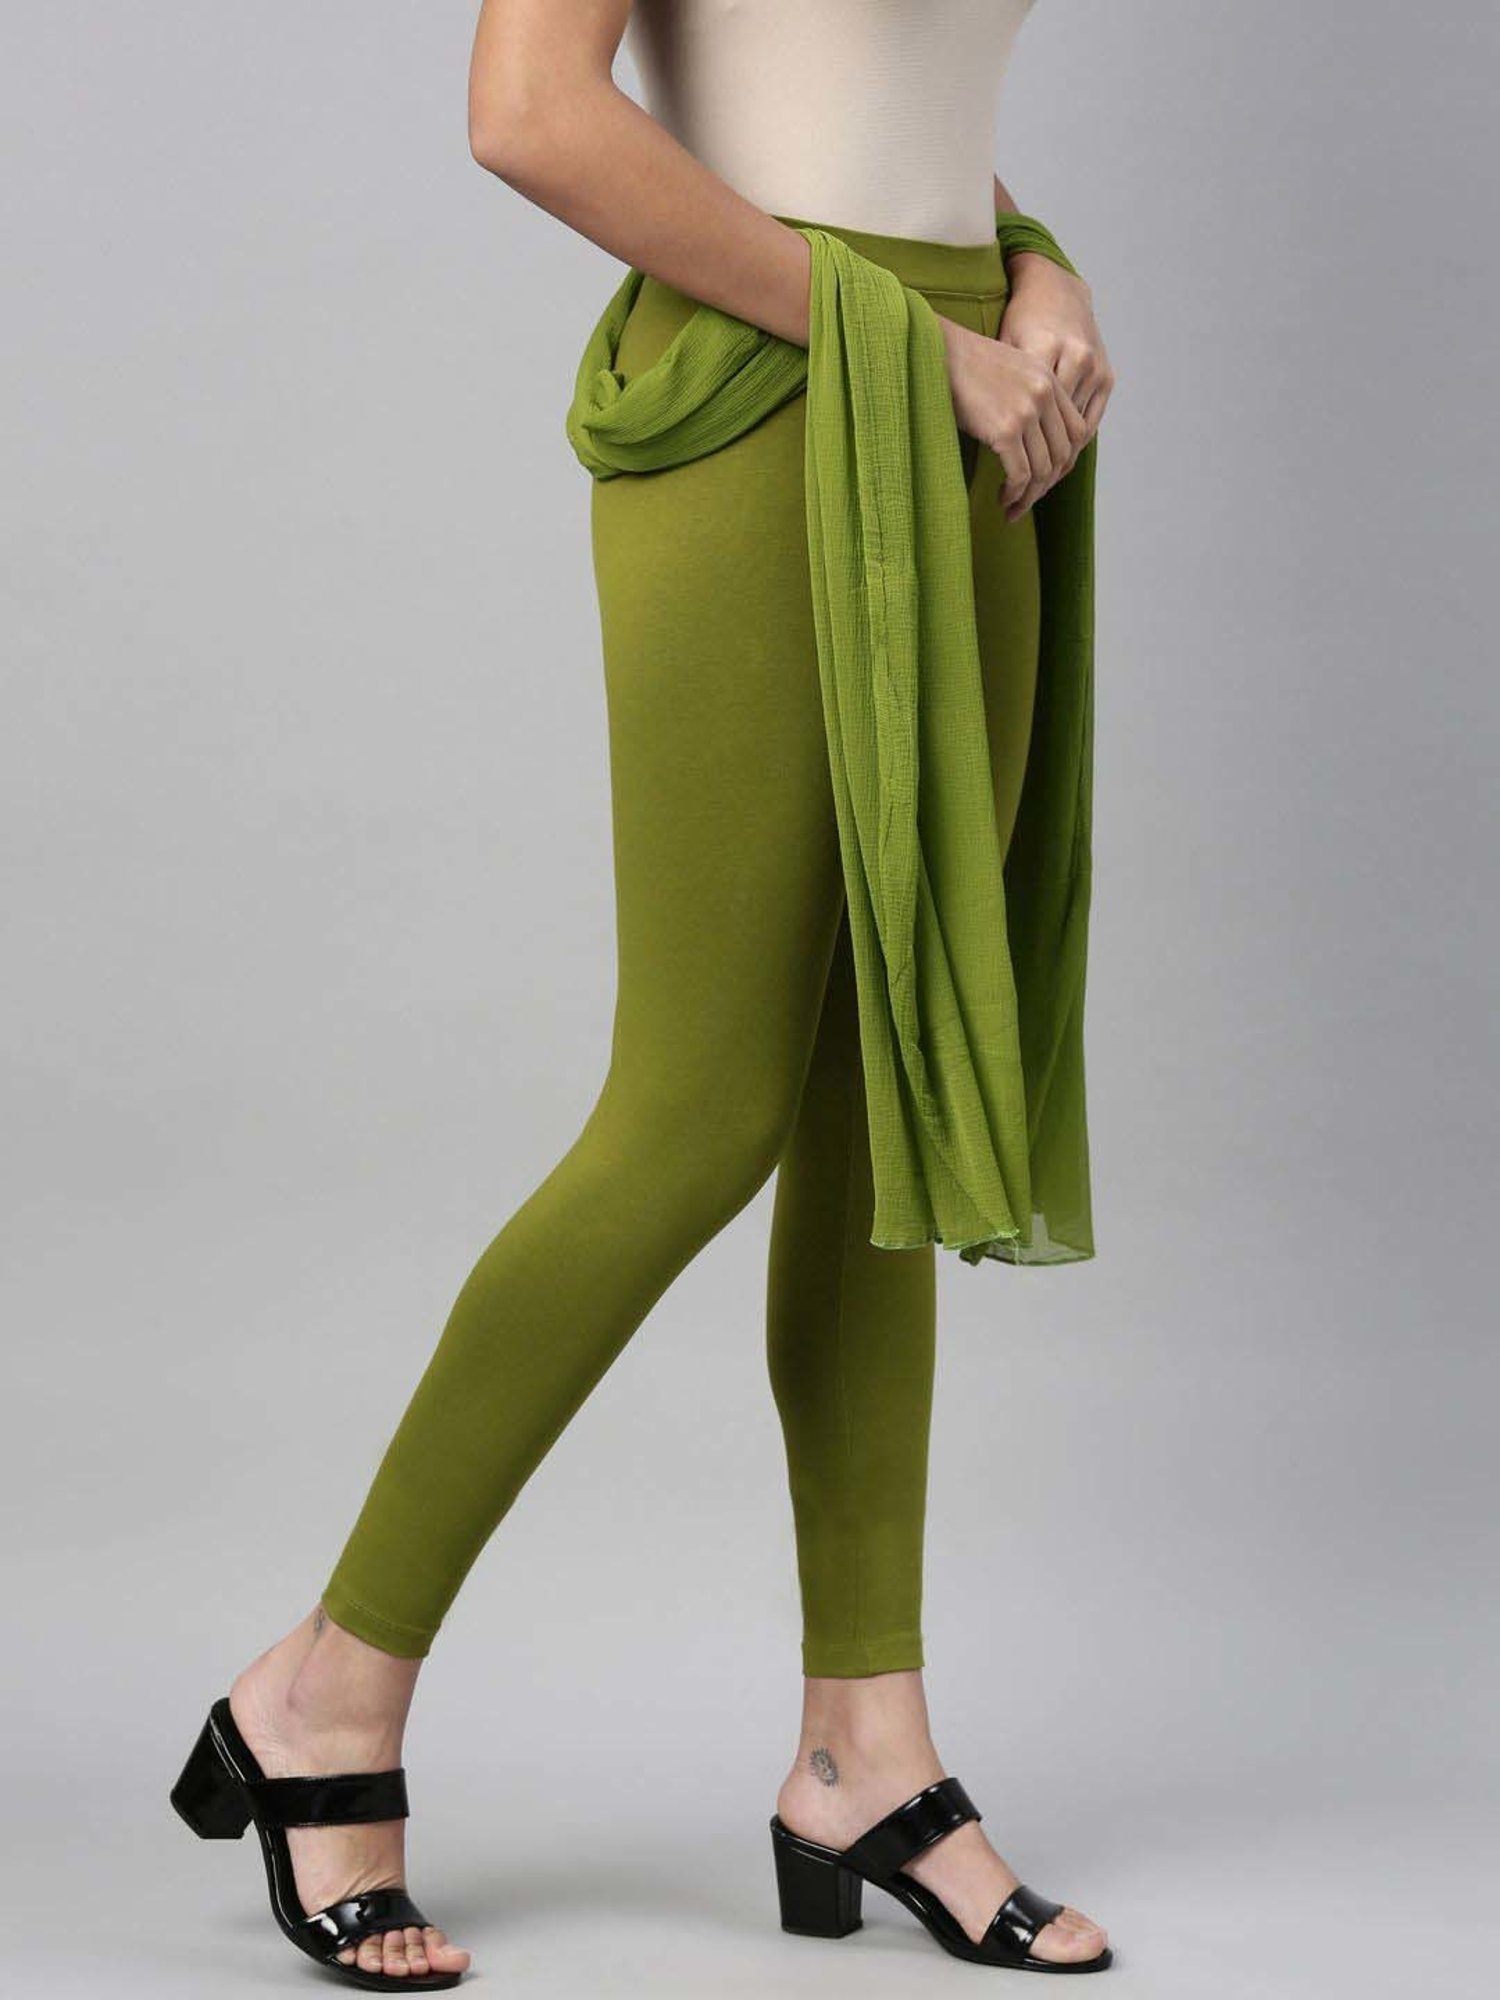 Twinbirds Parrot Green Solid Ankle Legging